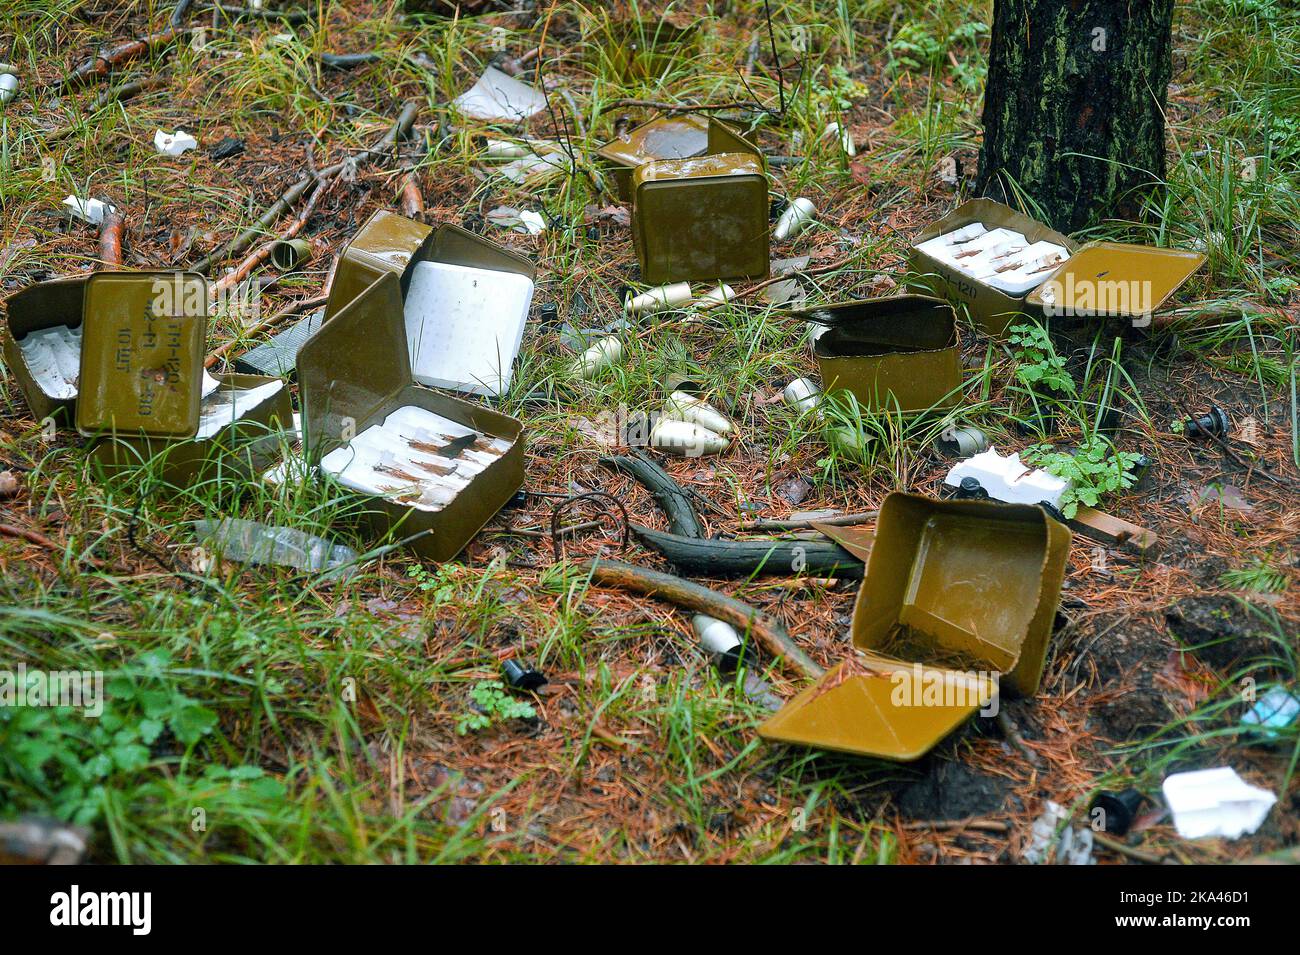 KHARKIV REGION, UKRAINE - OCTOBER 26, 2022 - The boxes with the fuses for a BM-21 Grad multiple rocket launcher is pictured in a forest near Izium aft Stock Photo